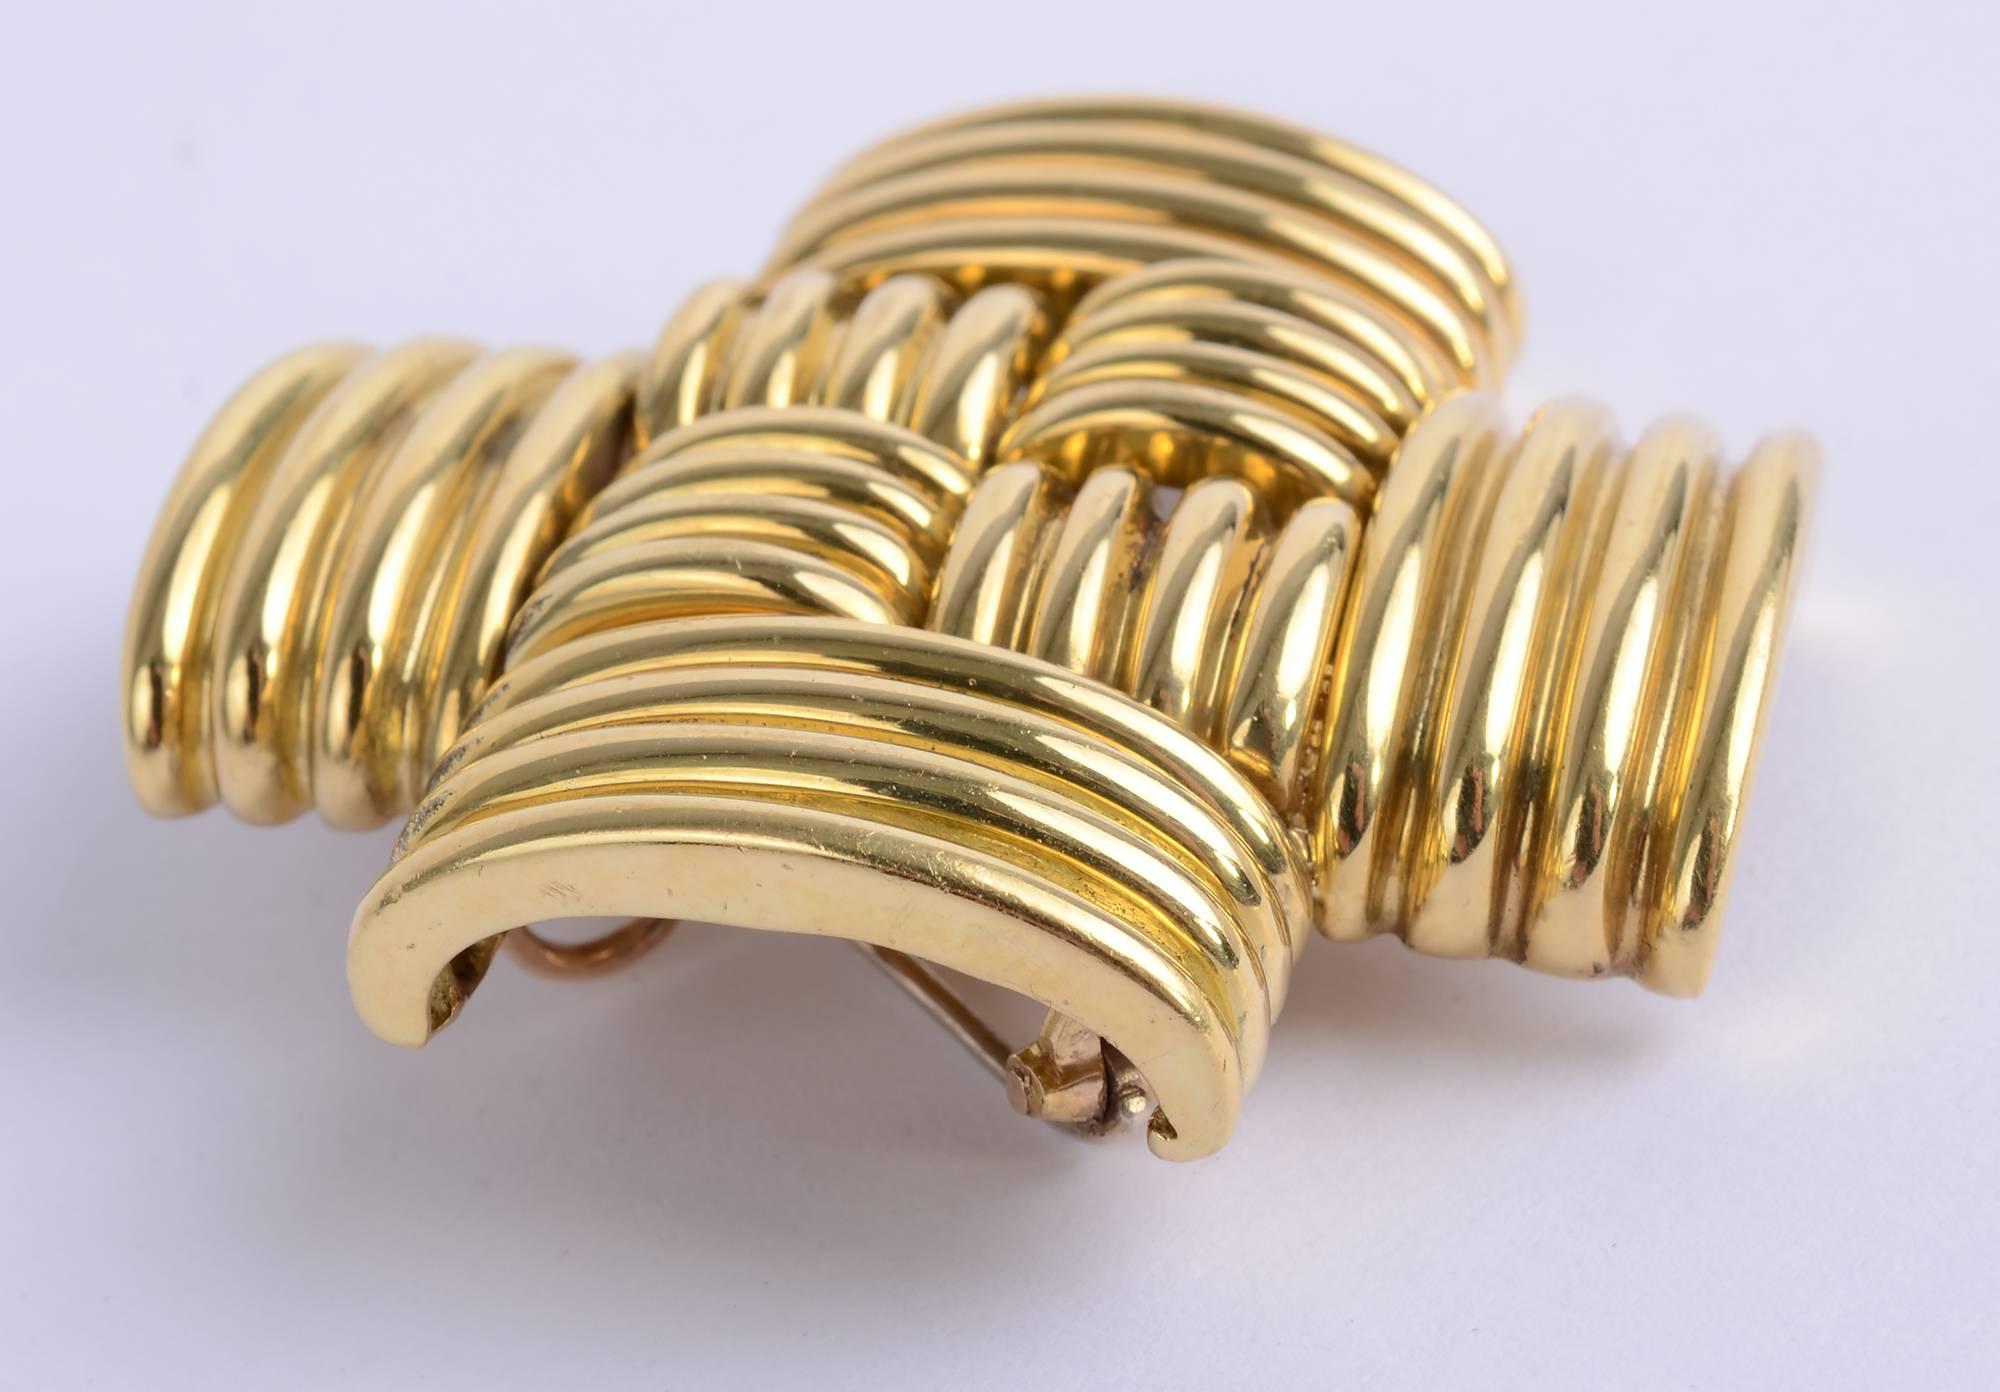 This ribbed, crisscross is both a pendant and a brooch. The ribbed bands of gold give it a nice reflectivity. The interior placement of the smaller bars creates an effective woven effect. Measurements are  1 13/16